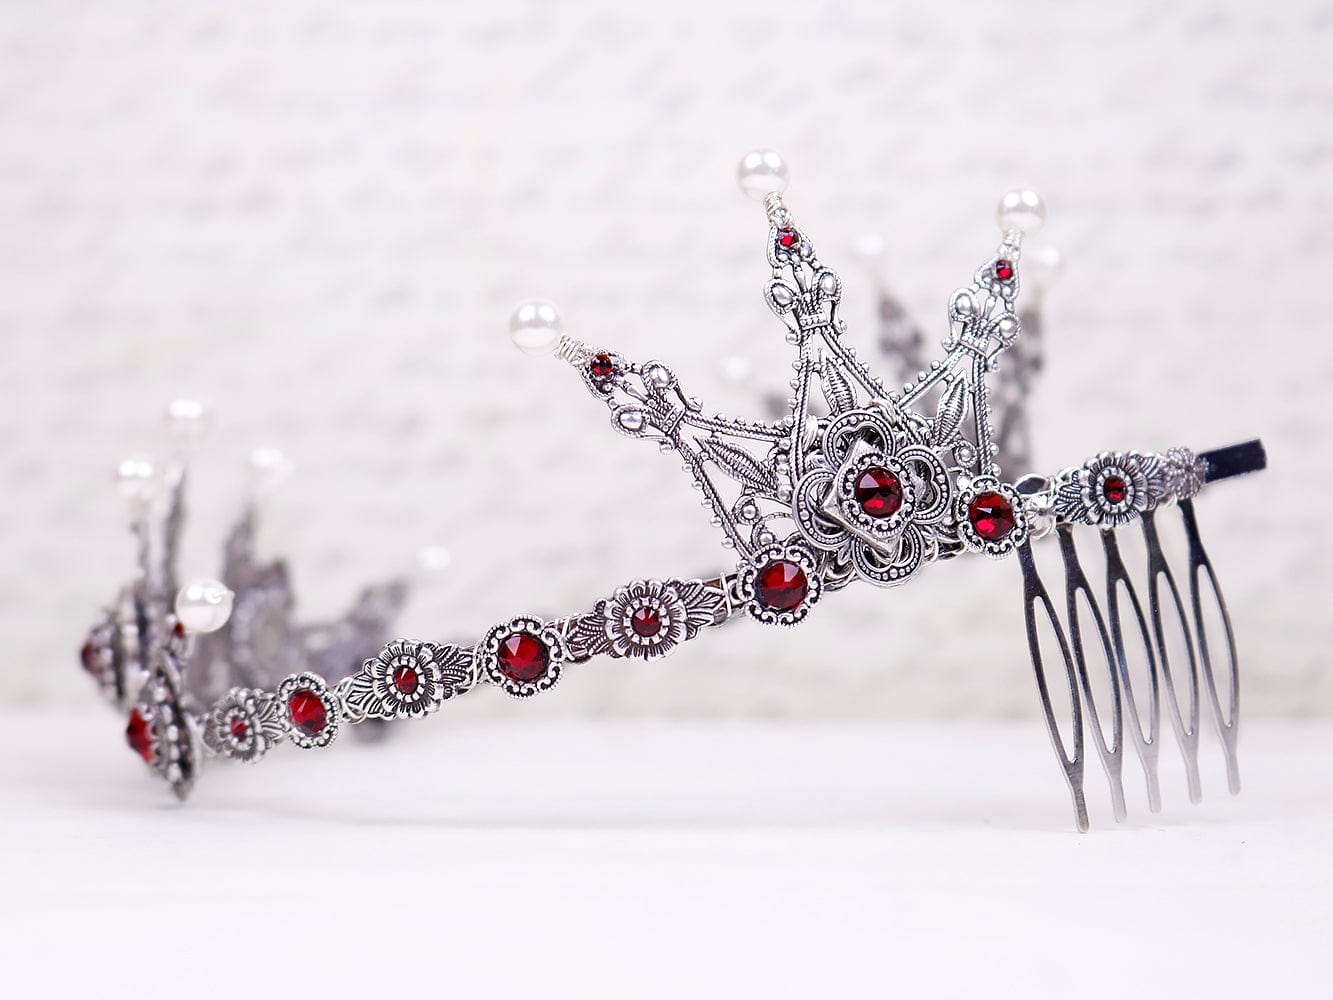 Avalon Pearl Tiara in Antiqued Silver by Rabbitwood and Reason.  Stones featured: Siam and White Pearl